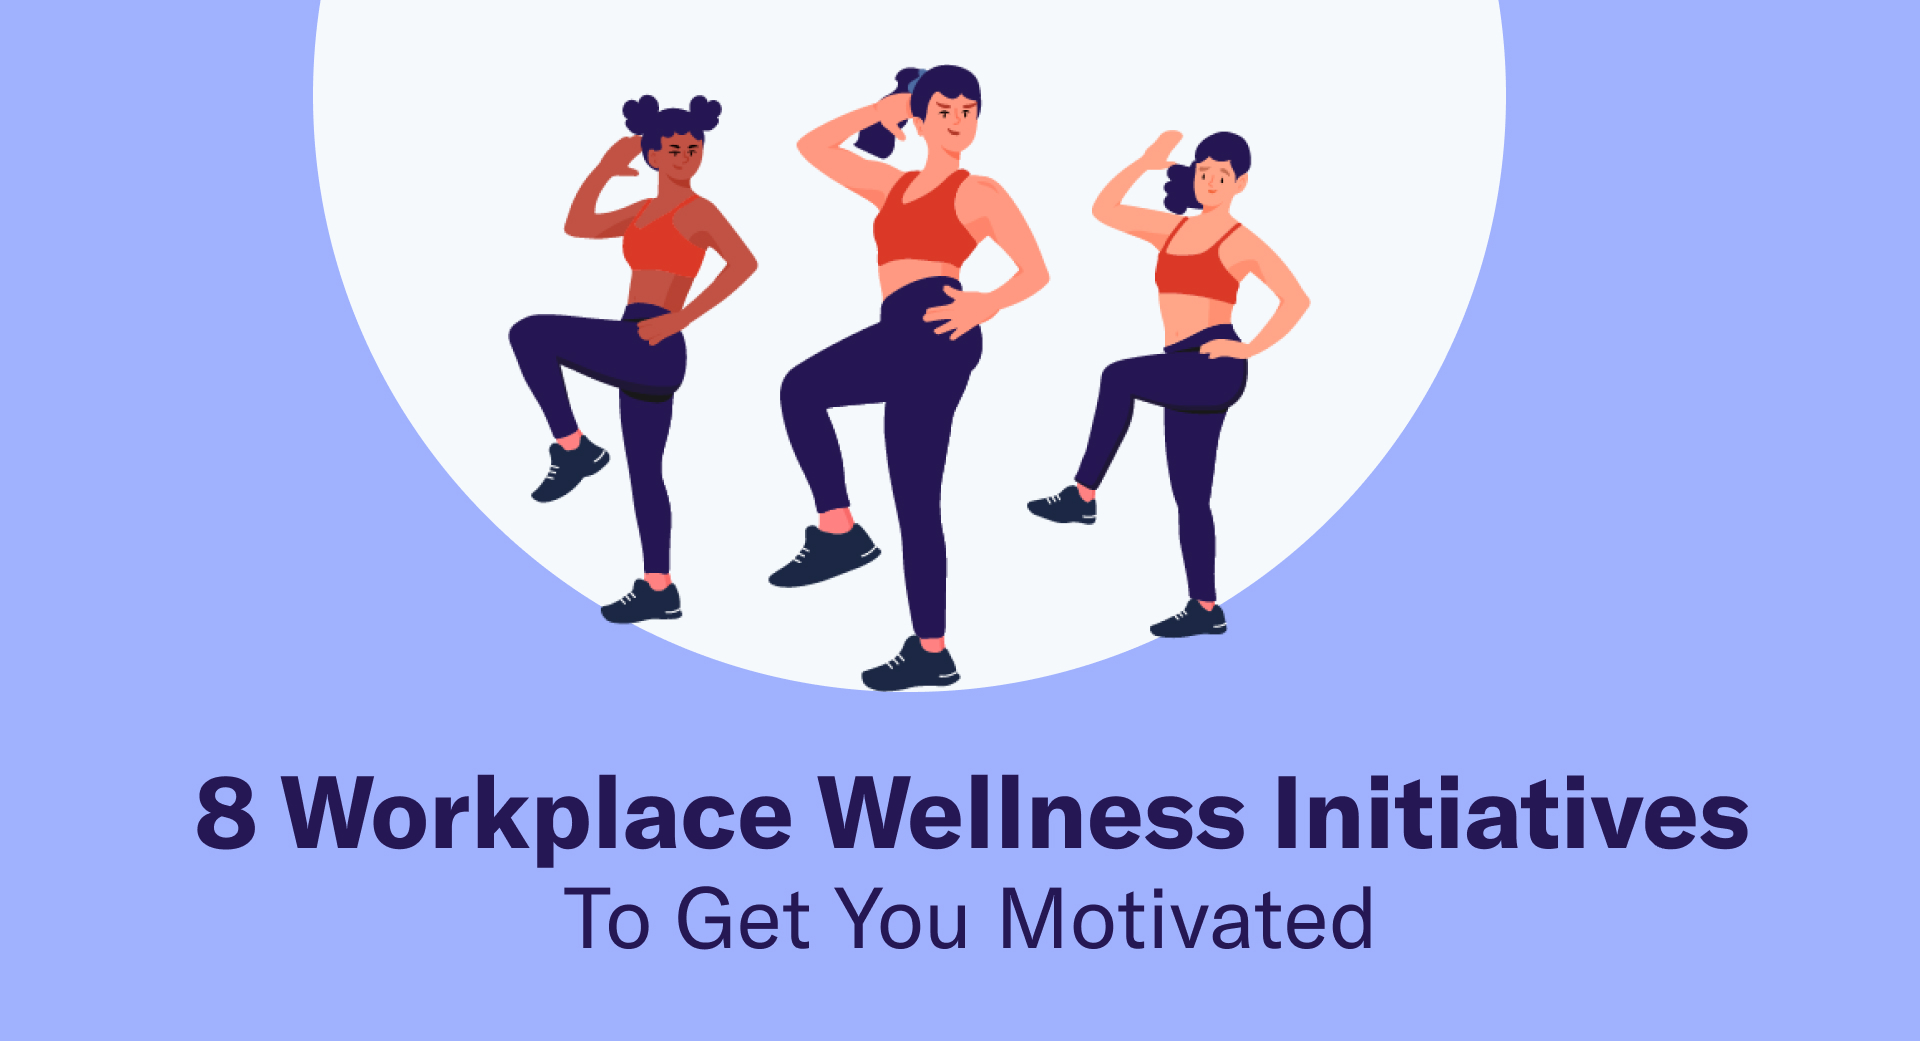 8 Workplace Wellness Initiatives To Get You Motivated